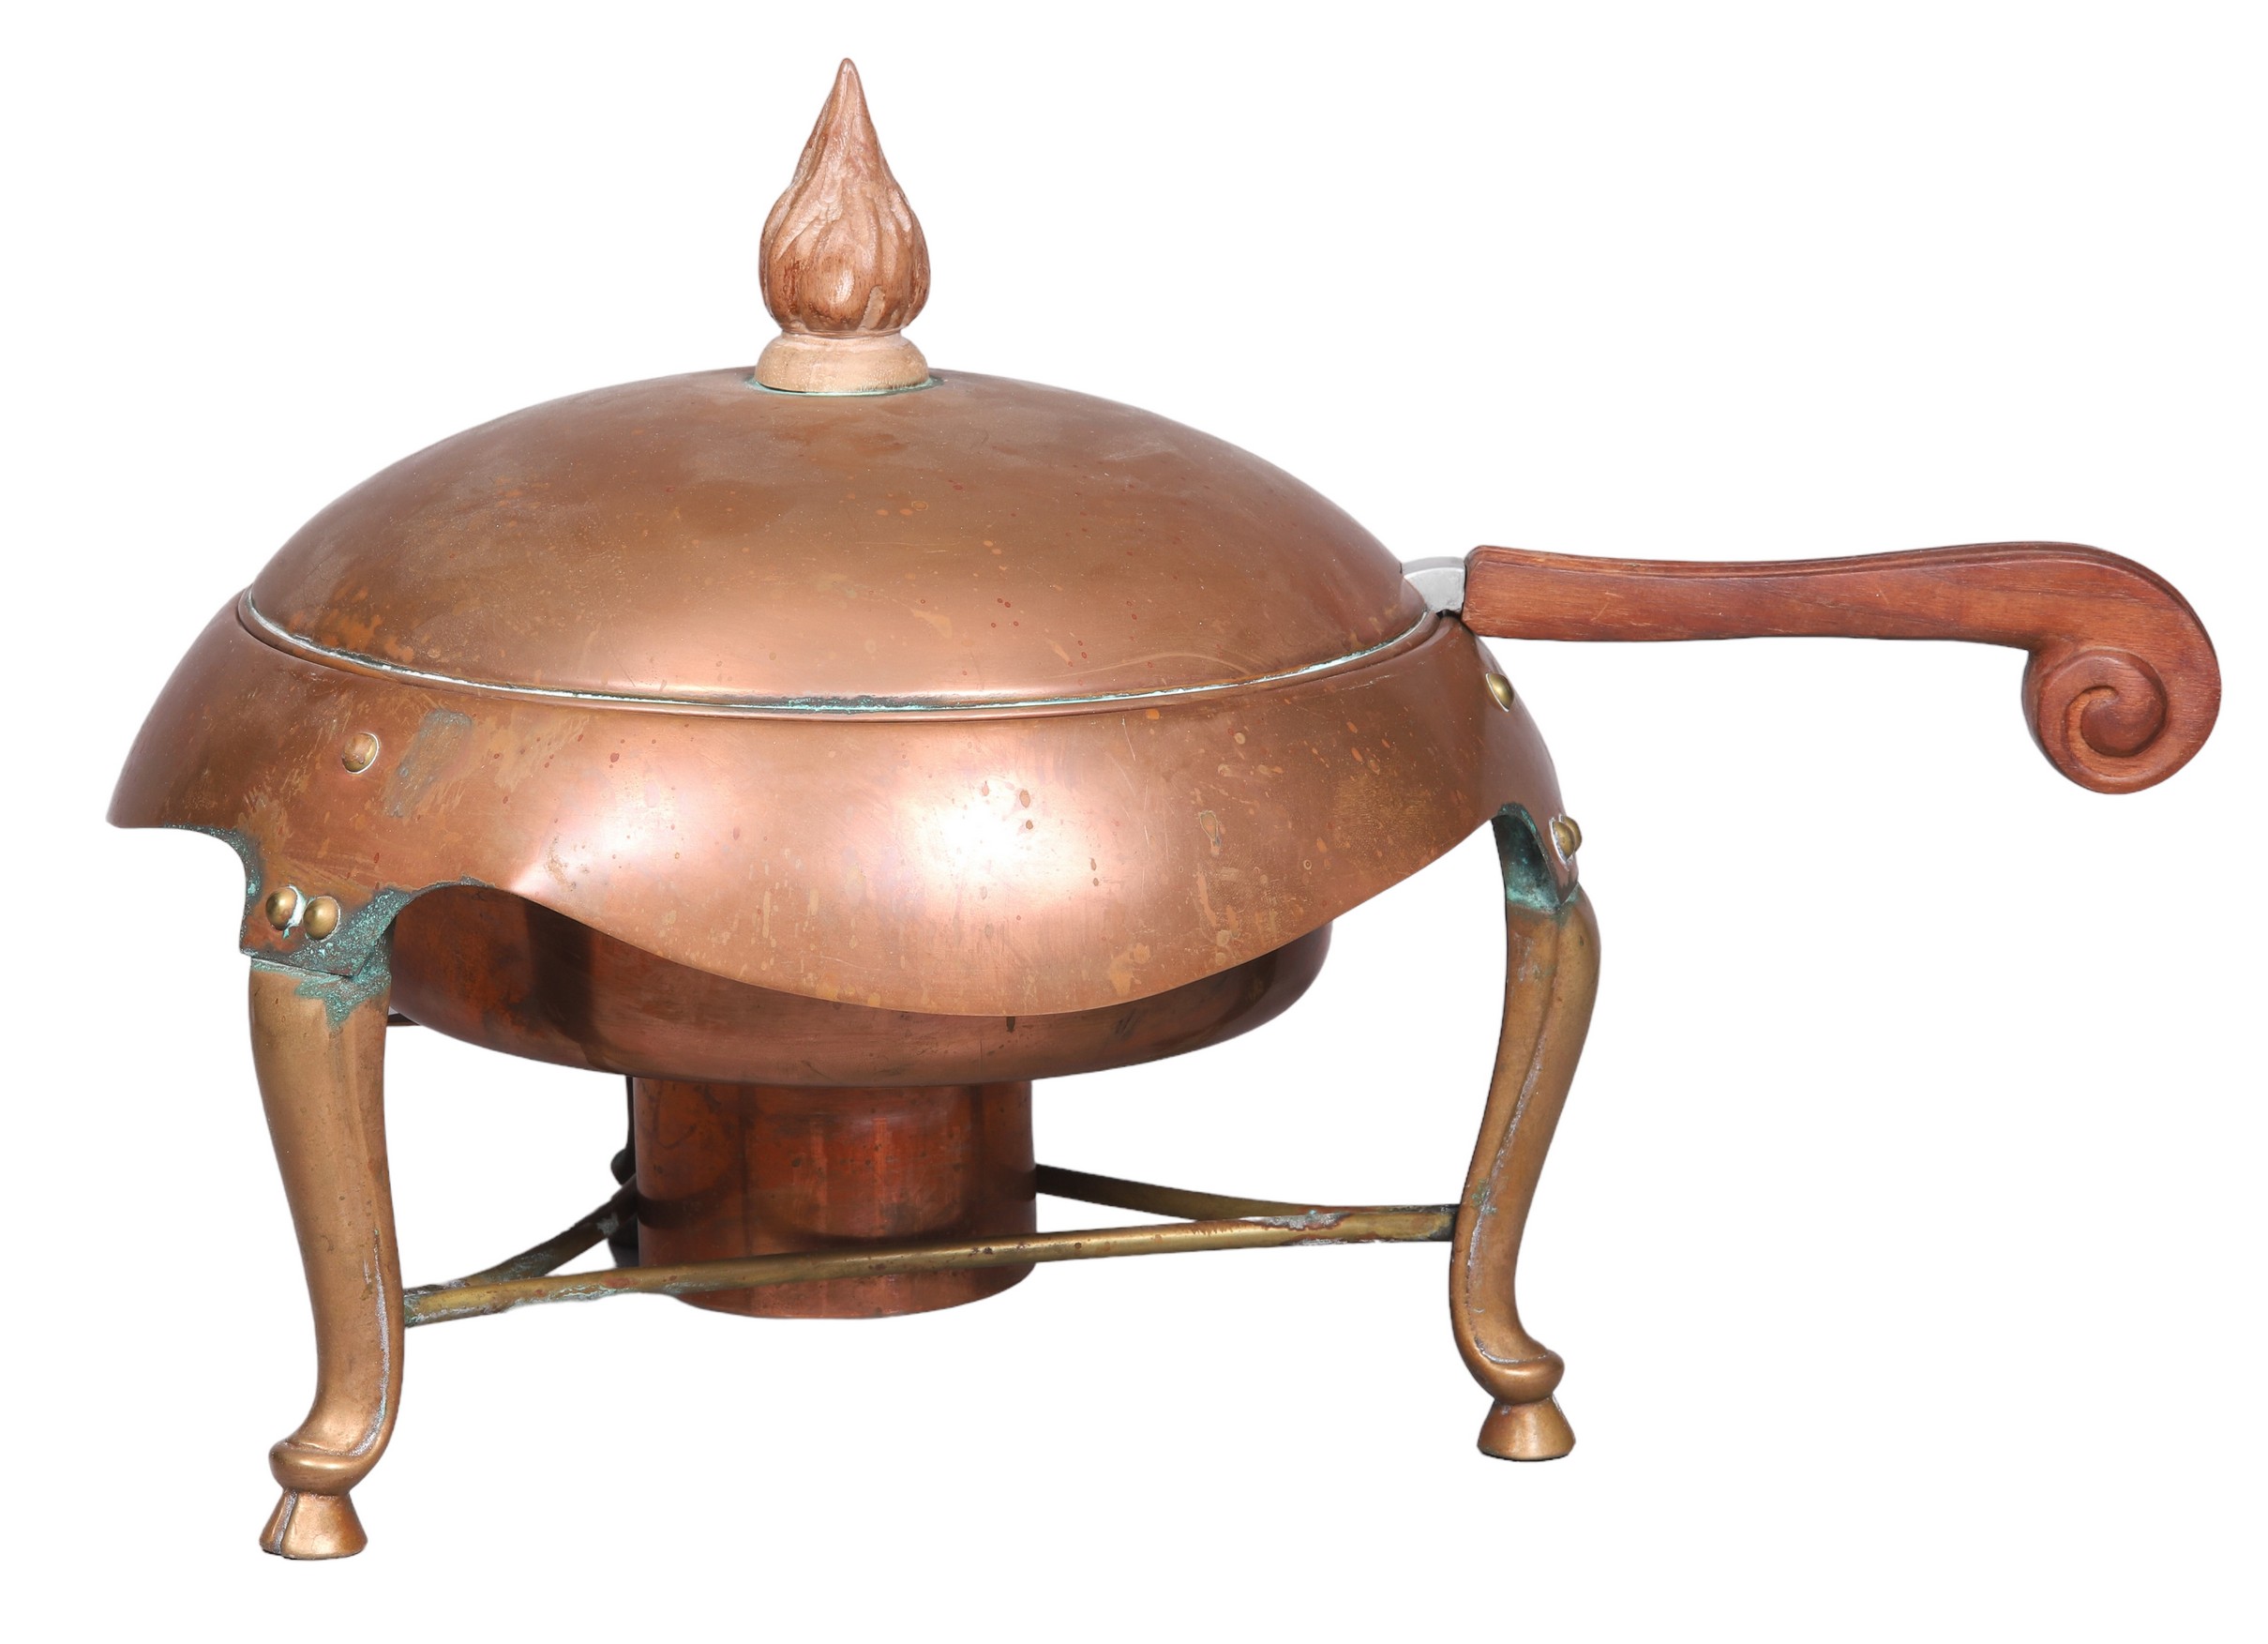 JC Moore copper & brass chafing